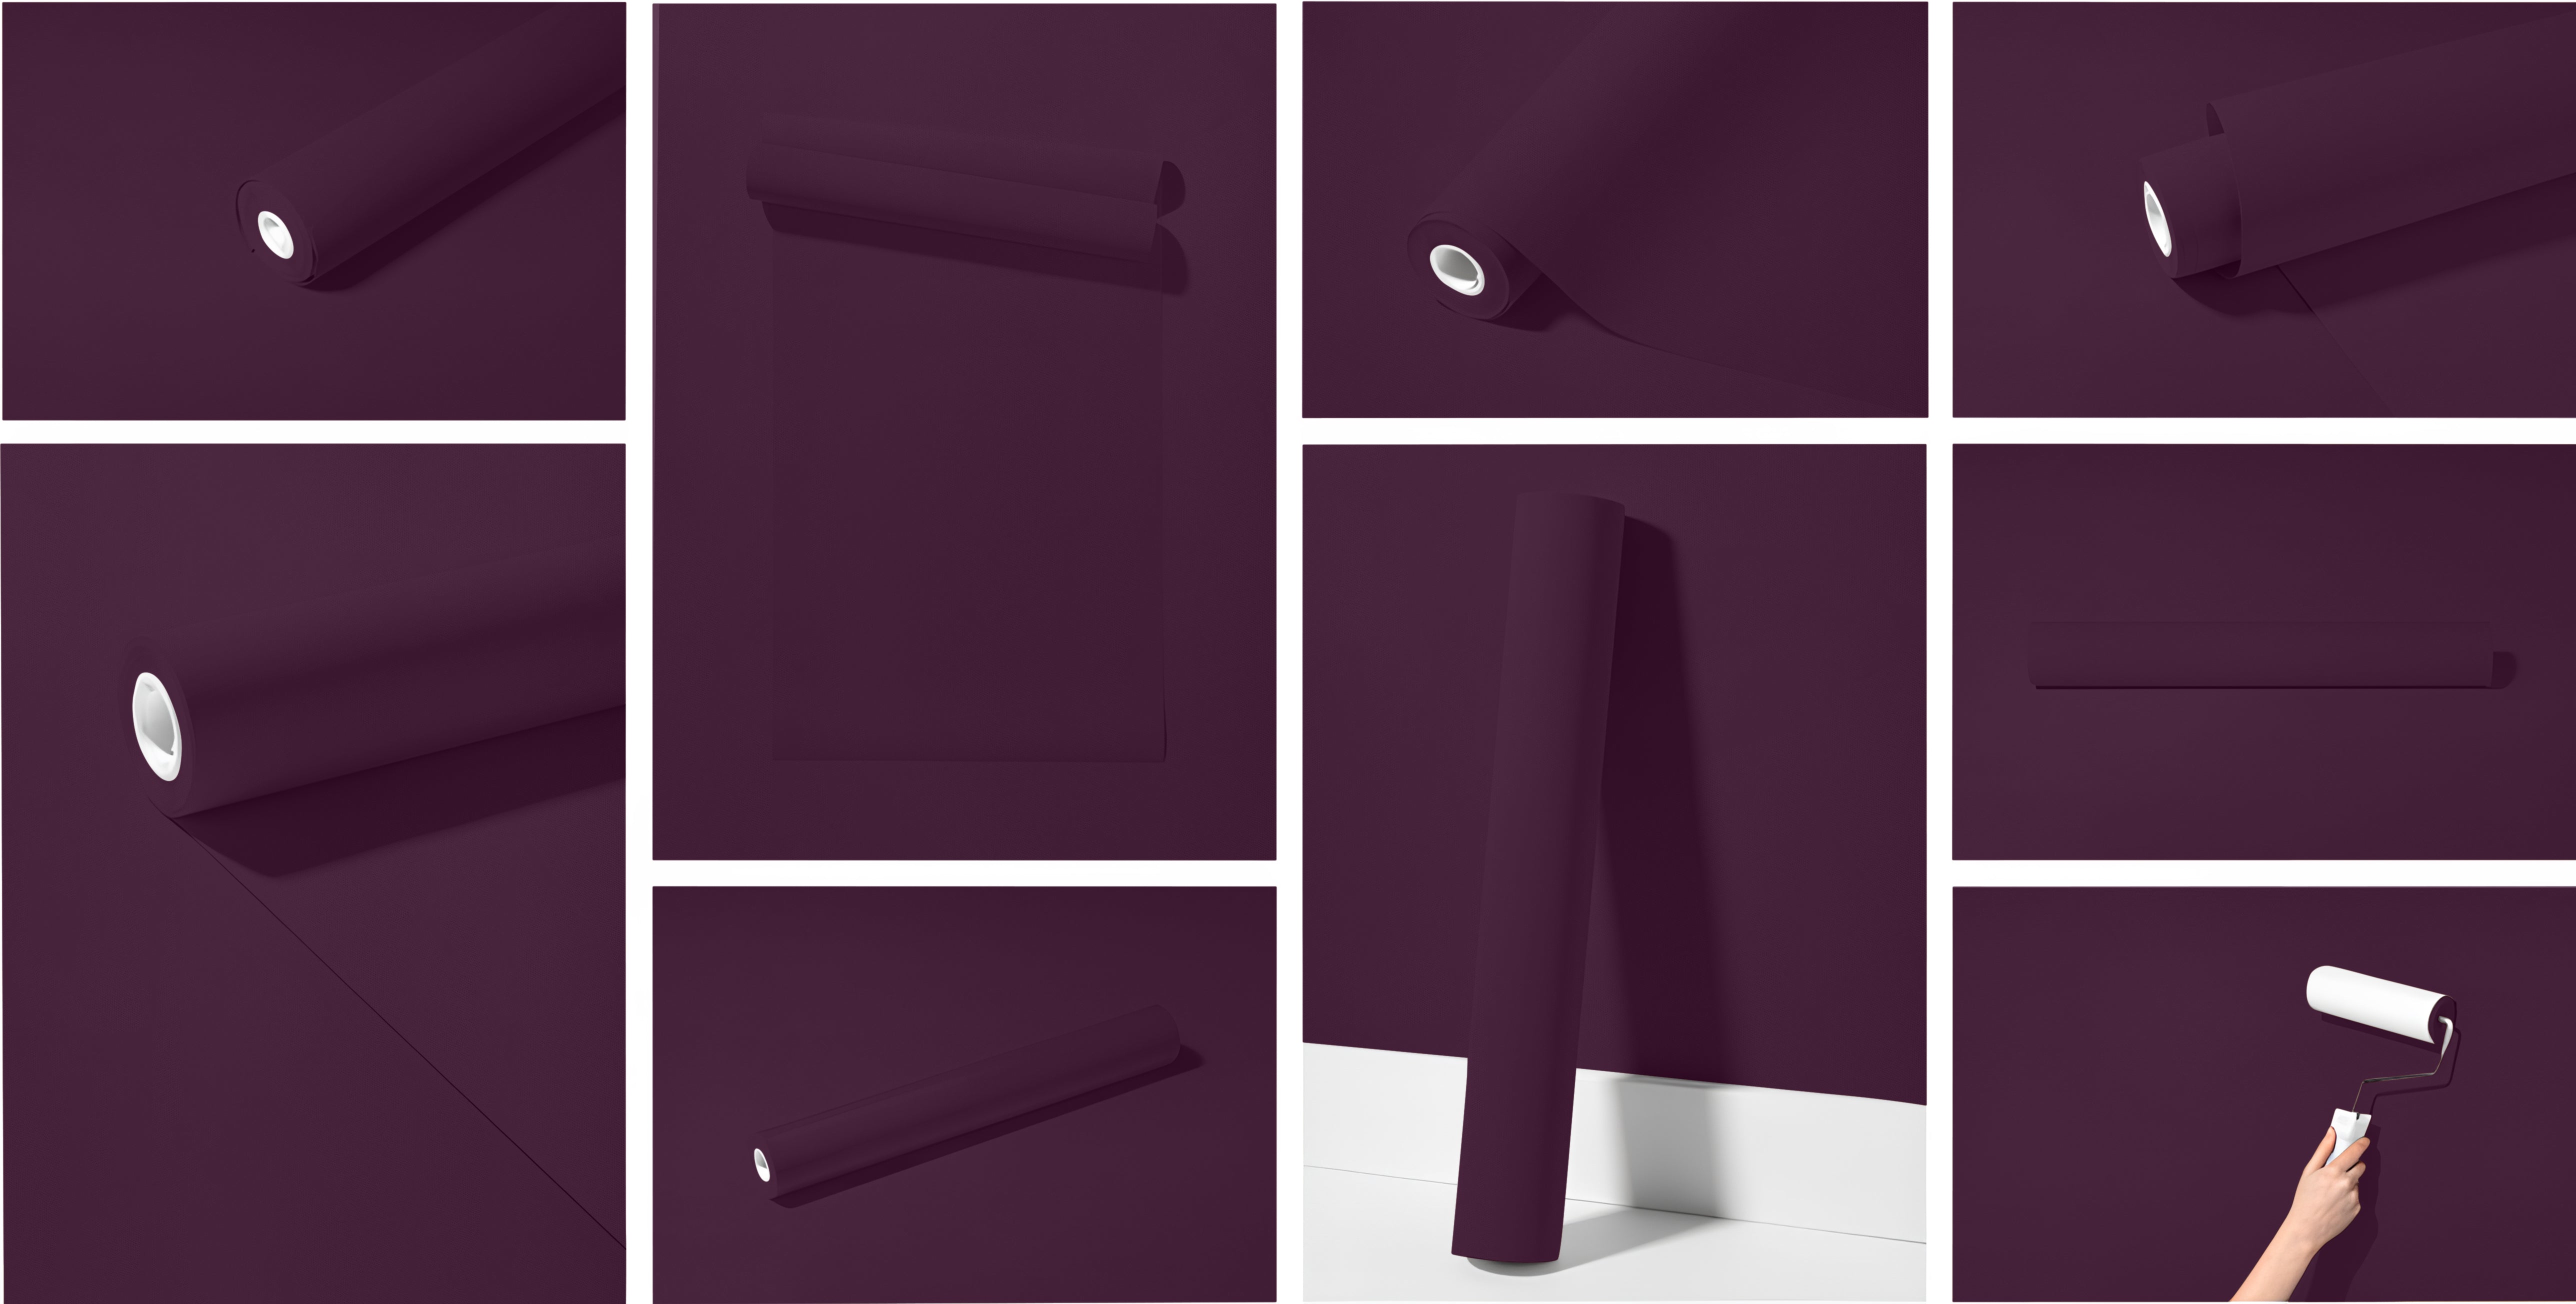 Peel & Stick Removable Re-usable Paint - Color RAL 4007 Purple Violet - offRAL™ - RALRAW LLC, USA